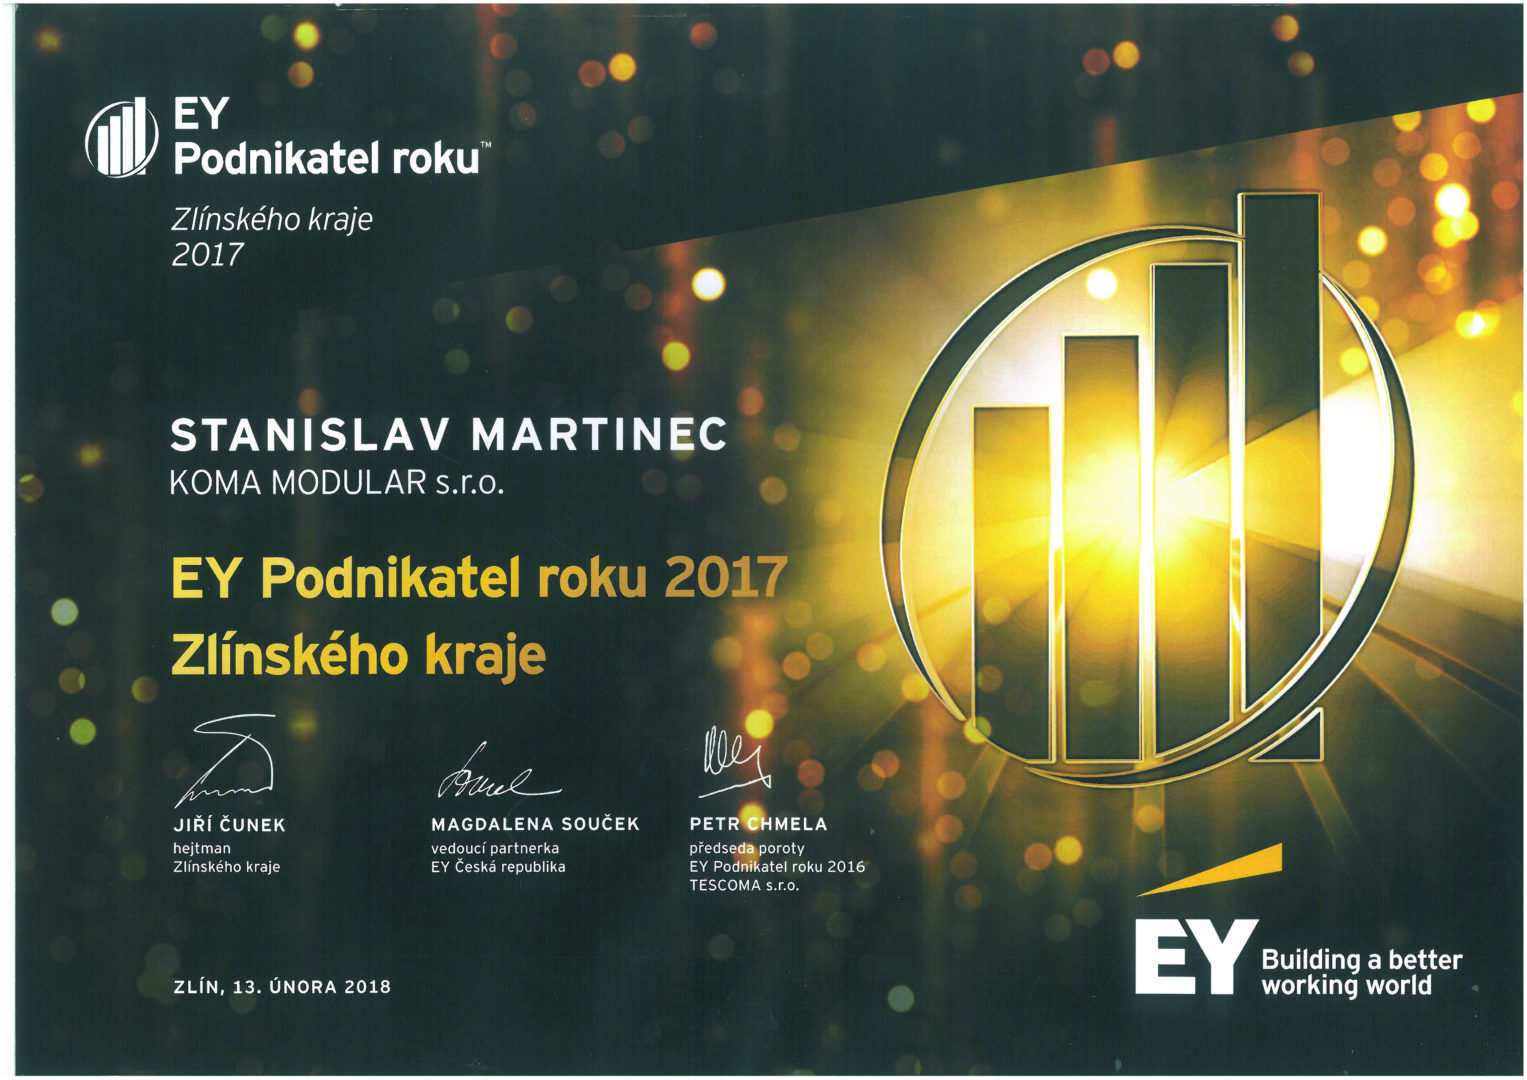 EY Entrepreneur of the Year 2017 of the Zlín Region